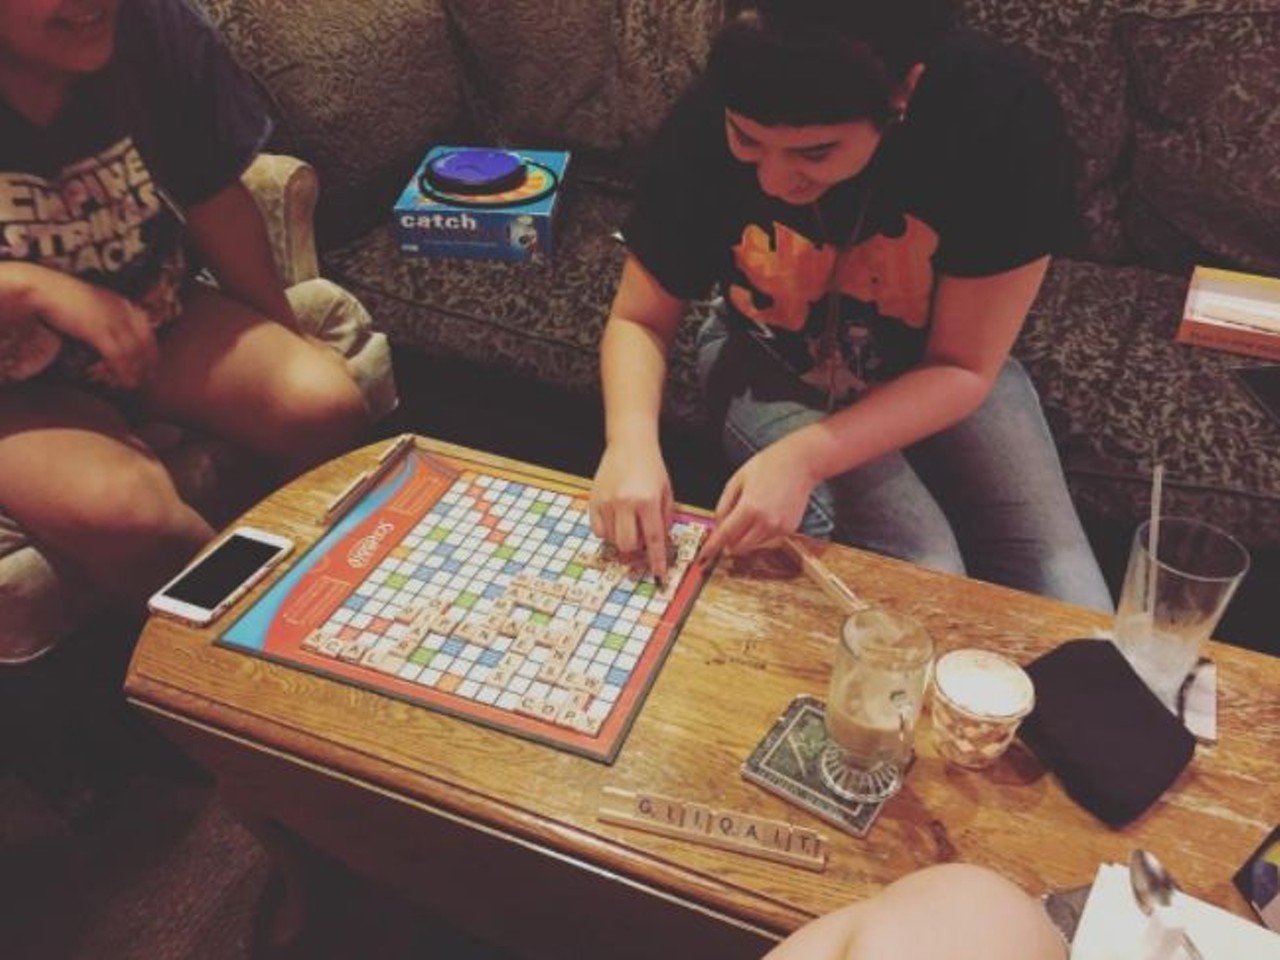 Play boardgames  at Candlelight Coffeehouse 
Grab a coffee, beer or glass of wine and challenge your friends to an evening of board games. It's a cheap way to pass the time and you'll get to show off your mad Scrabble skills.
Photo via Instagram, babydeniro